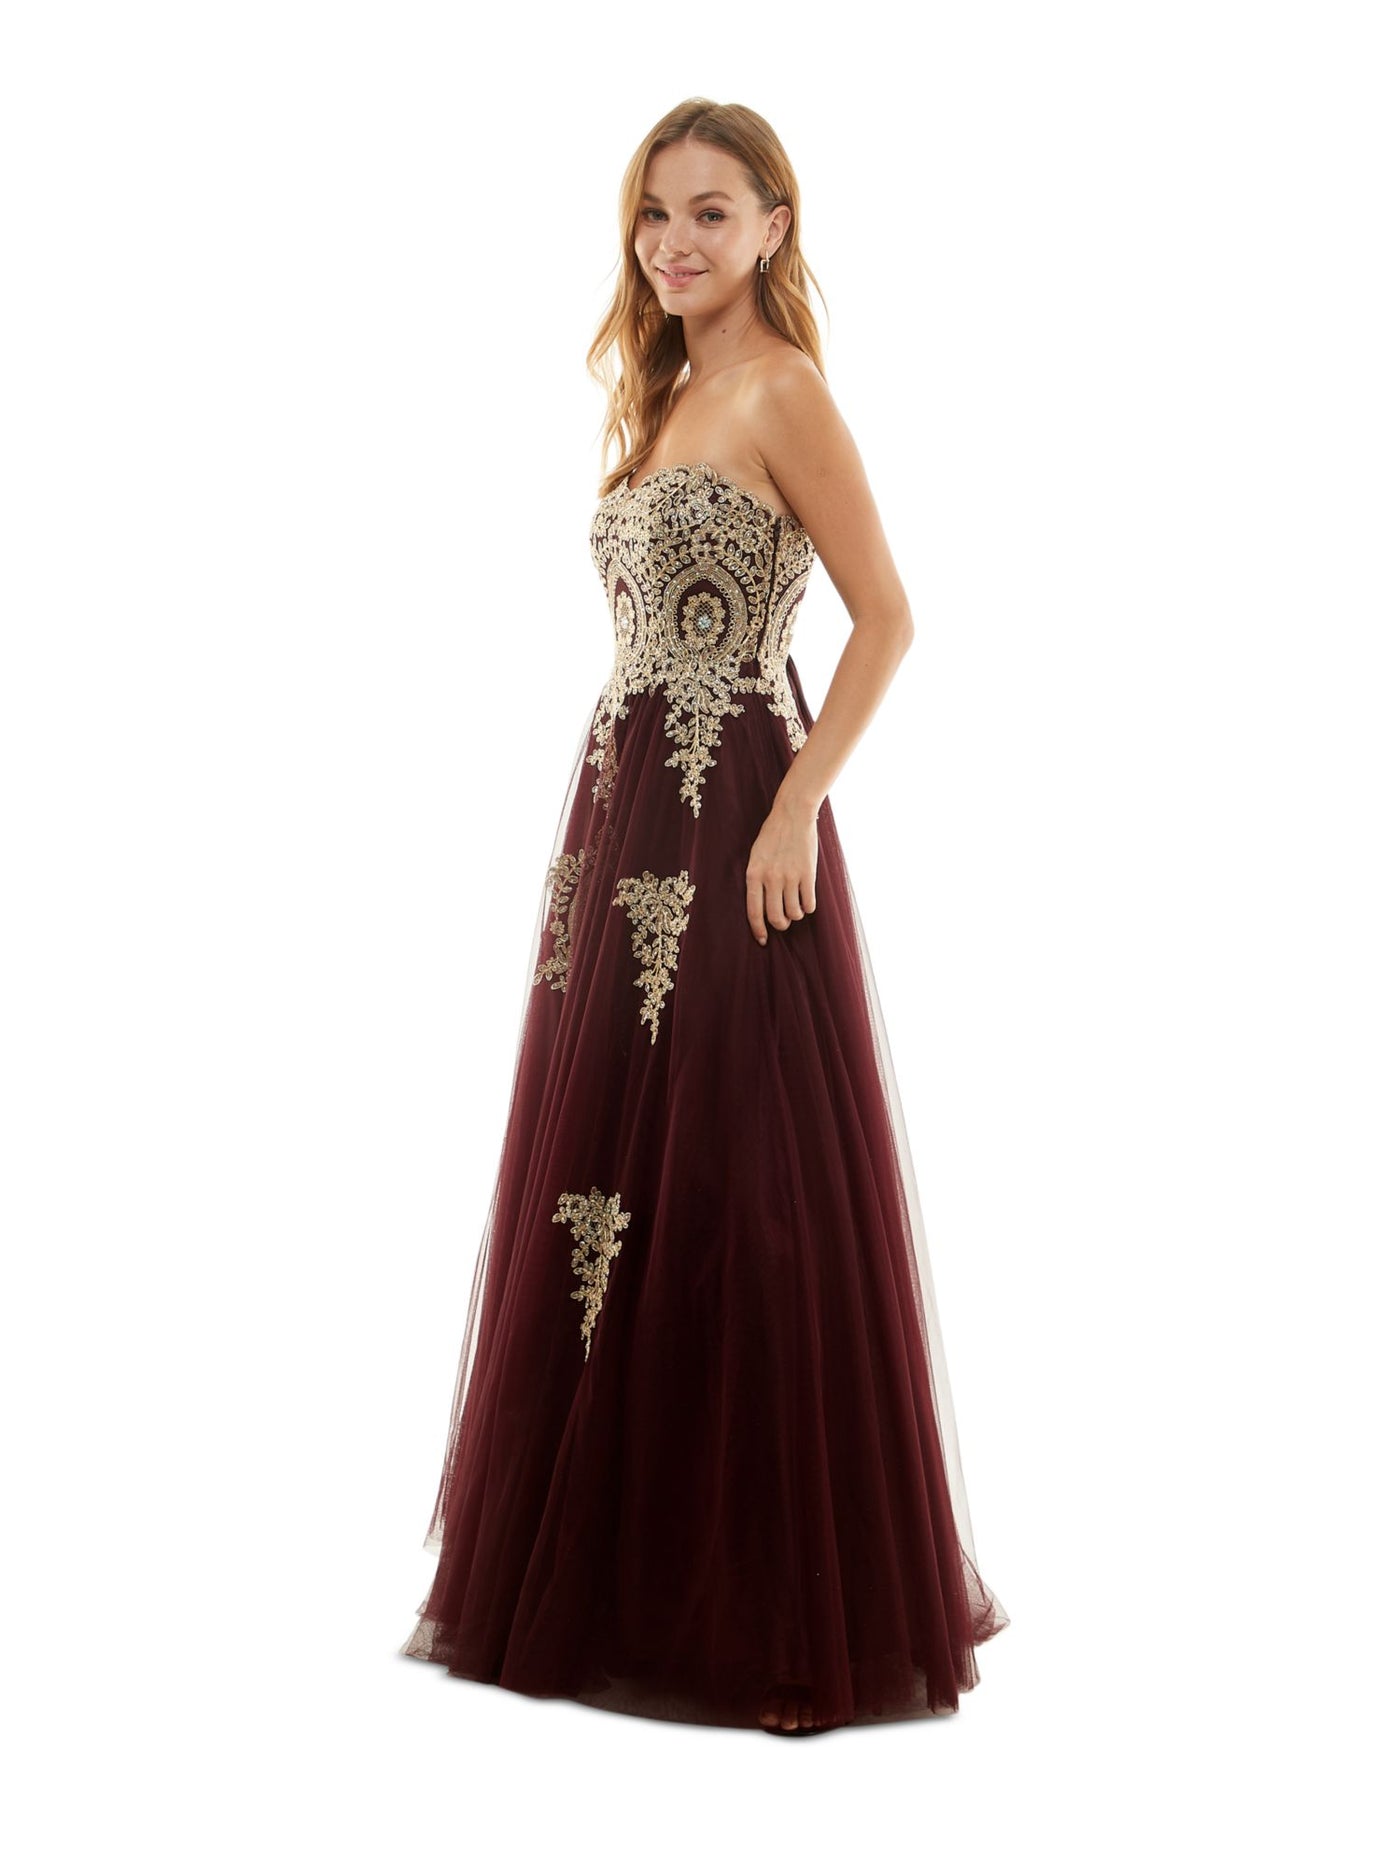 SAY YES TO THE PROM Womens Maroon Rhinestone Embroidered Lace-up Corset Zippered Tull Floral Sleeveless Sweetheart Neckline Full-Length Party Gown Dress Juniors 7